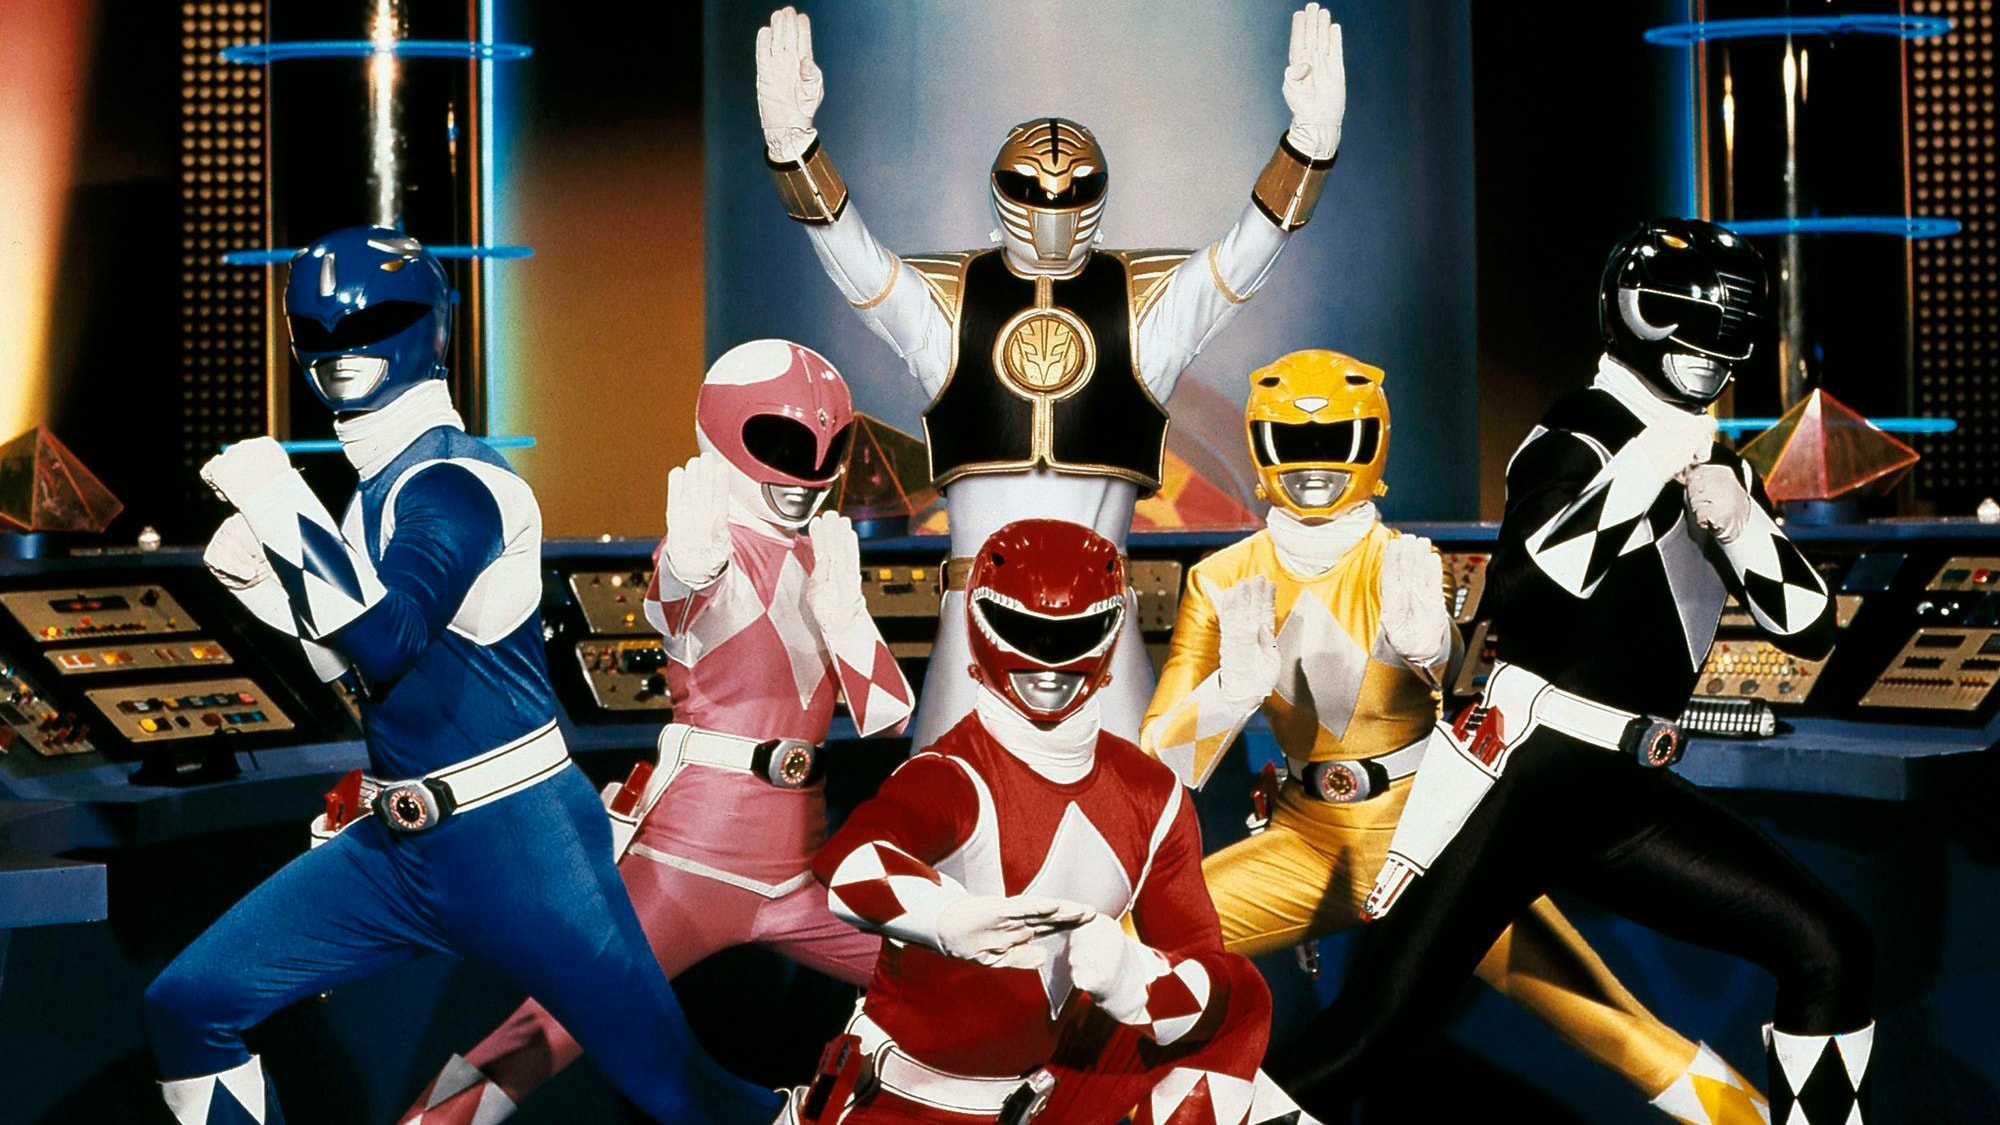 Mighty Morphin Power Rangers Saban's Film Compare Aesthetic